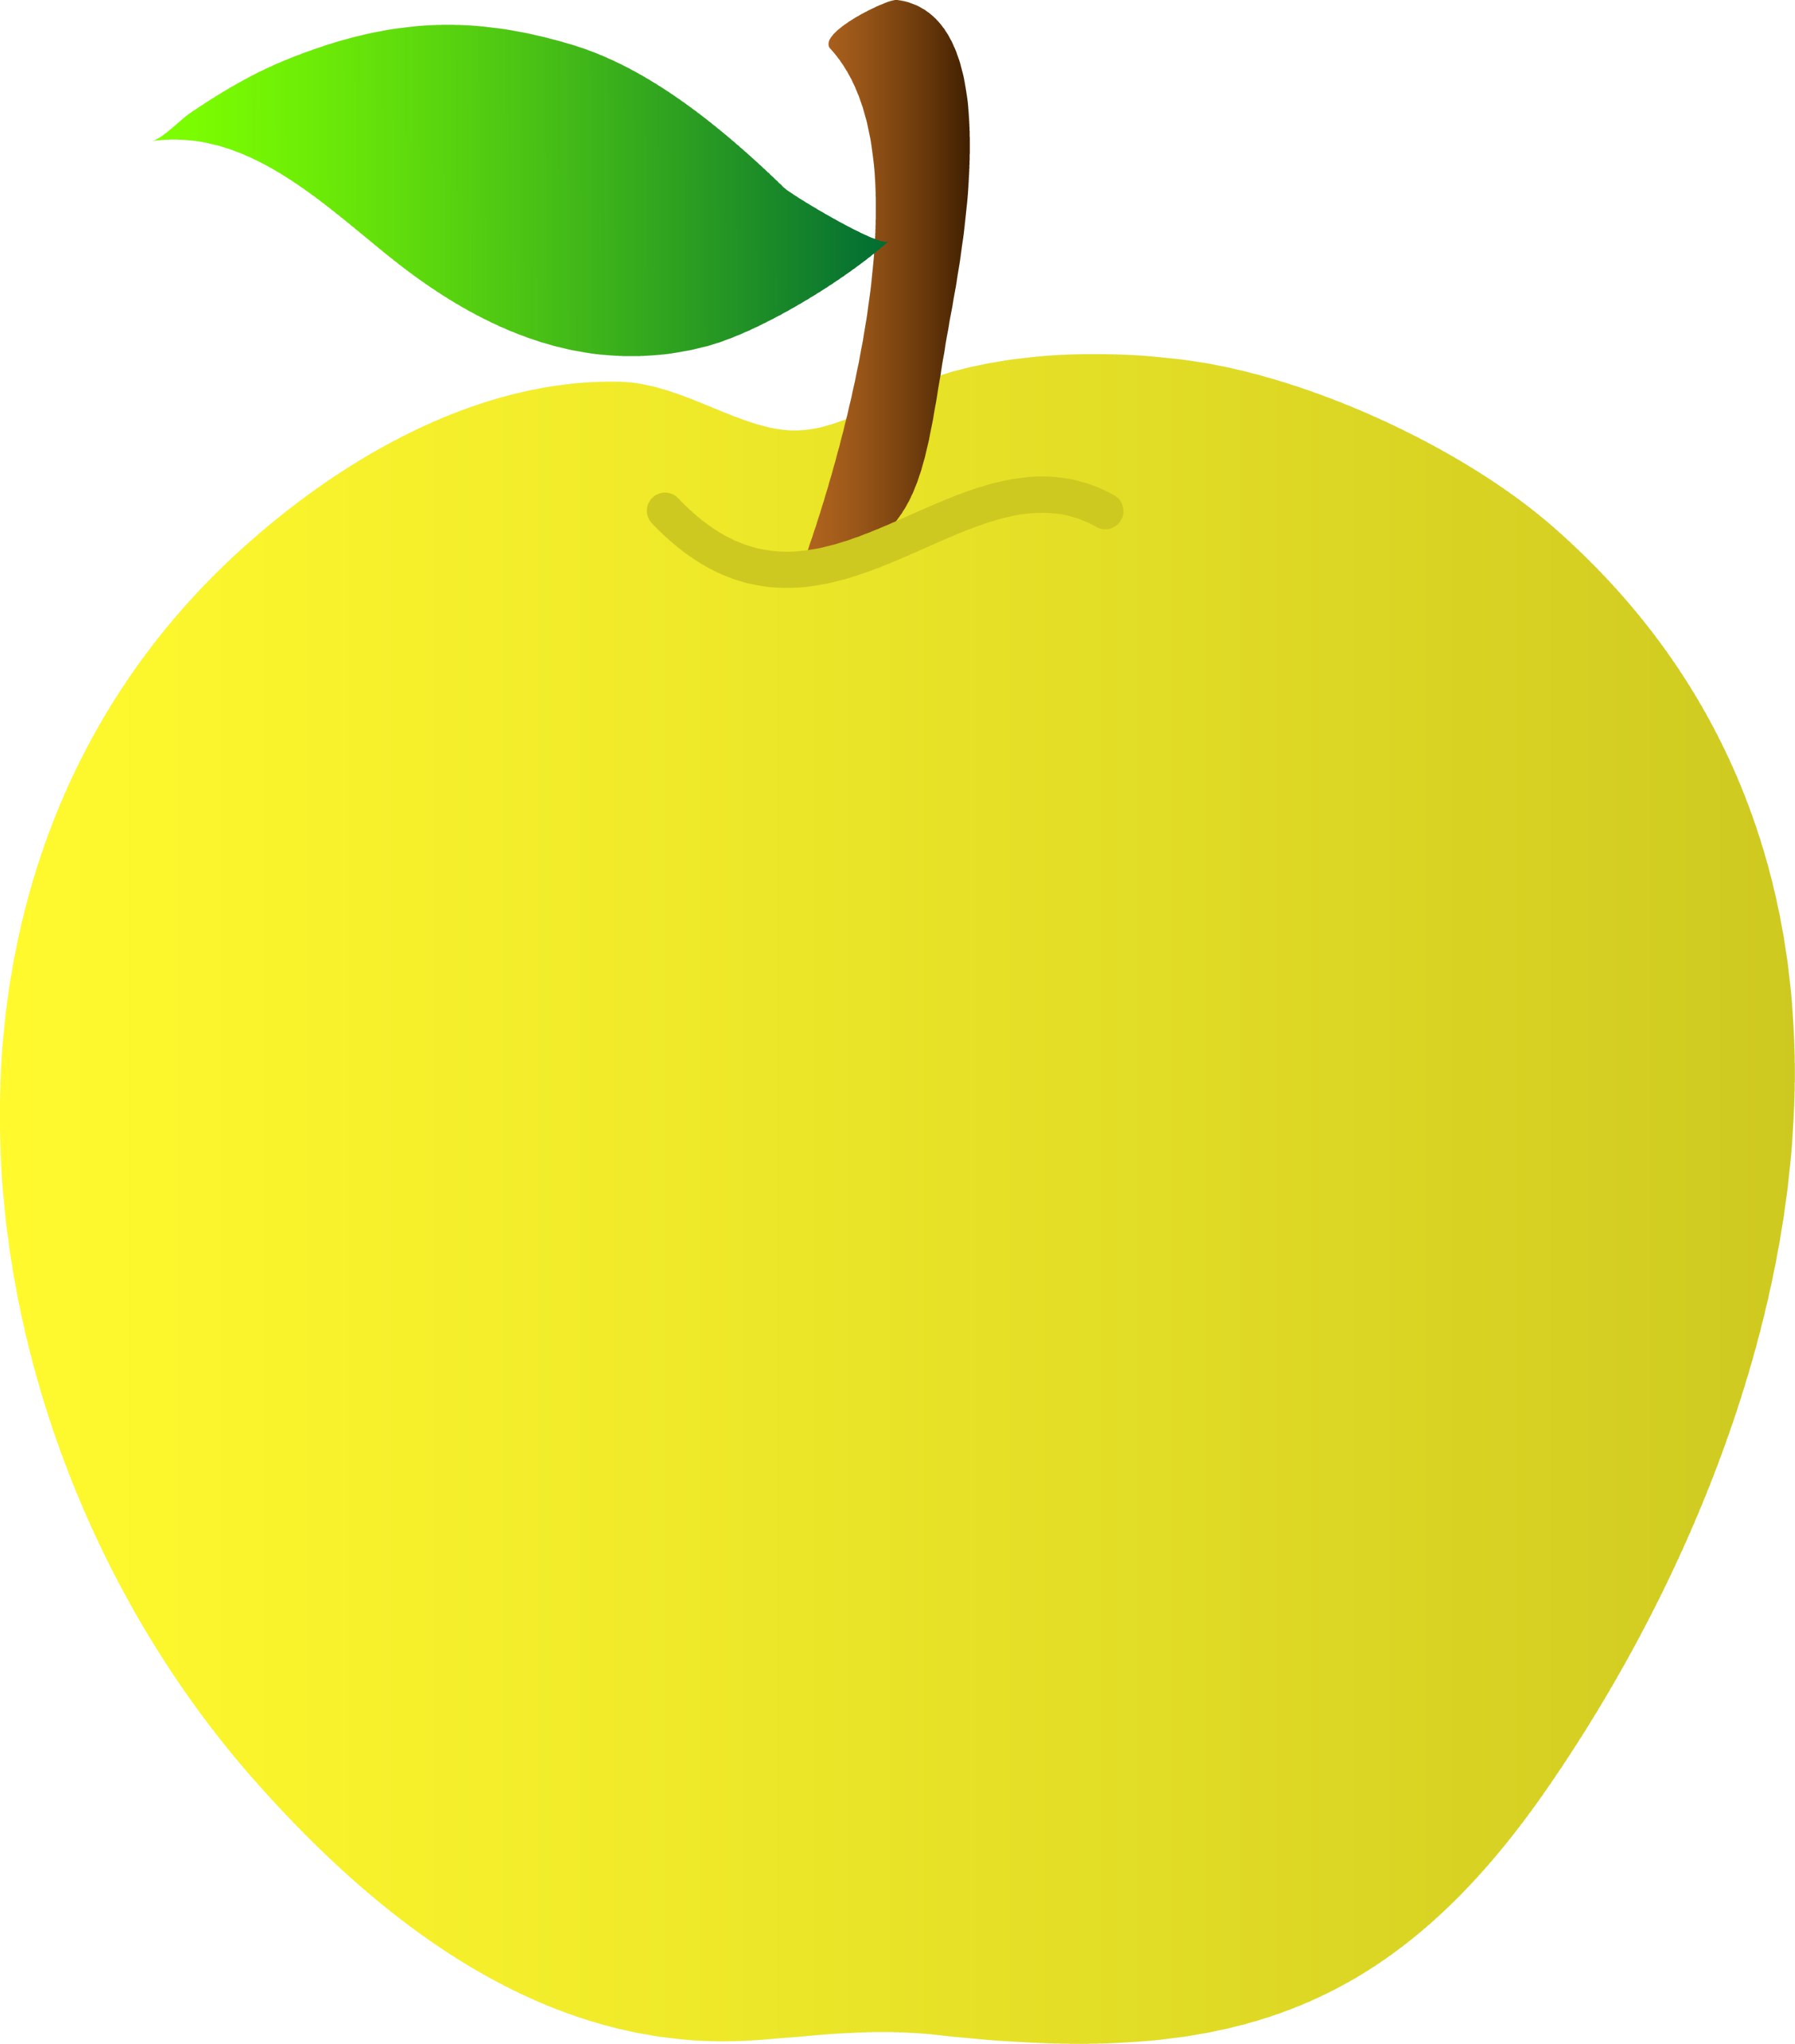 apple clipart images free - photo #43